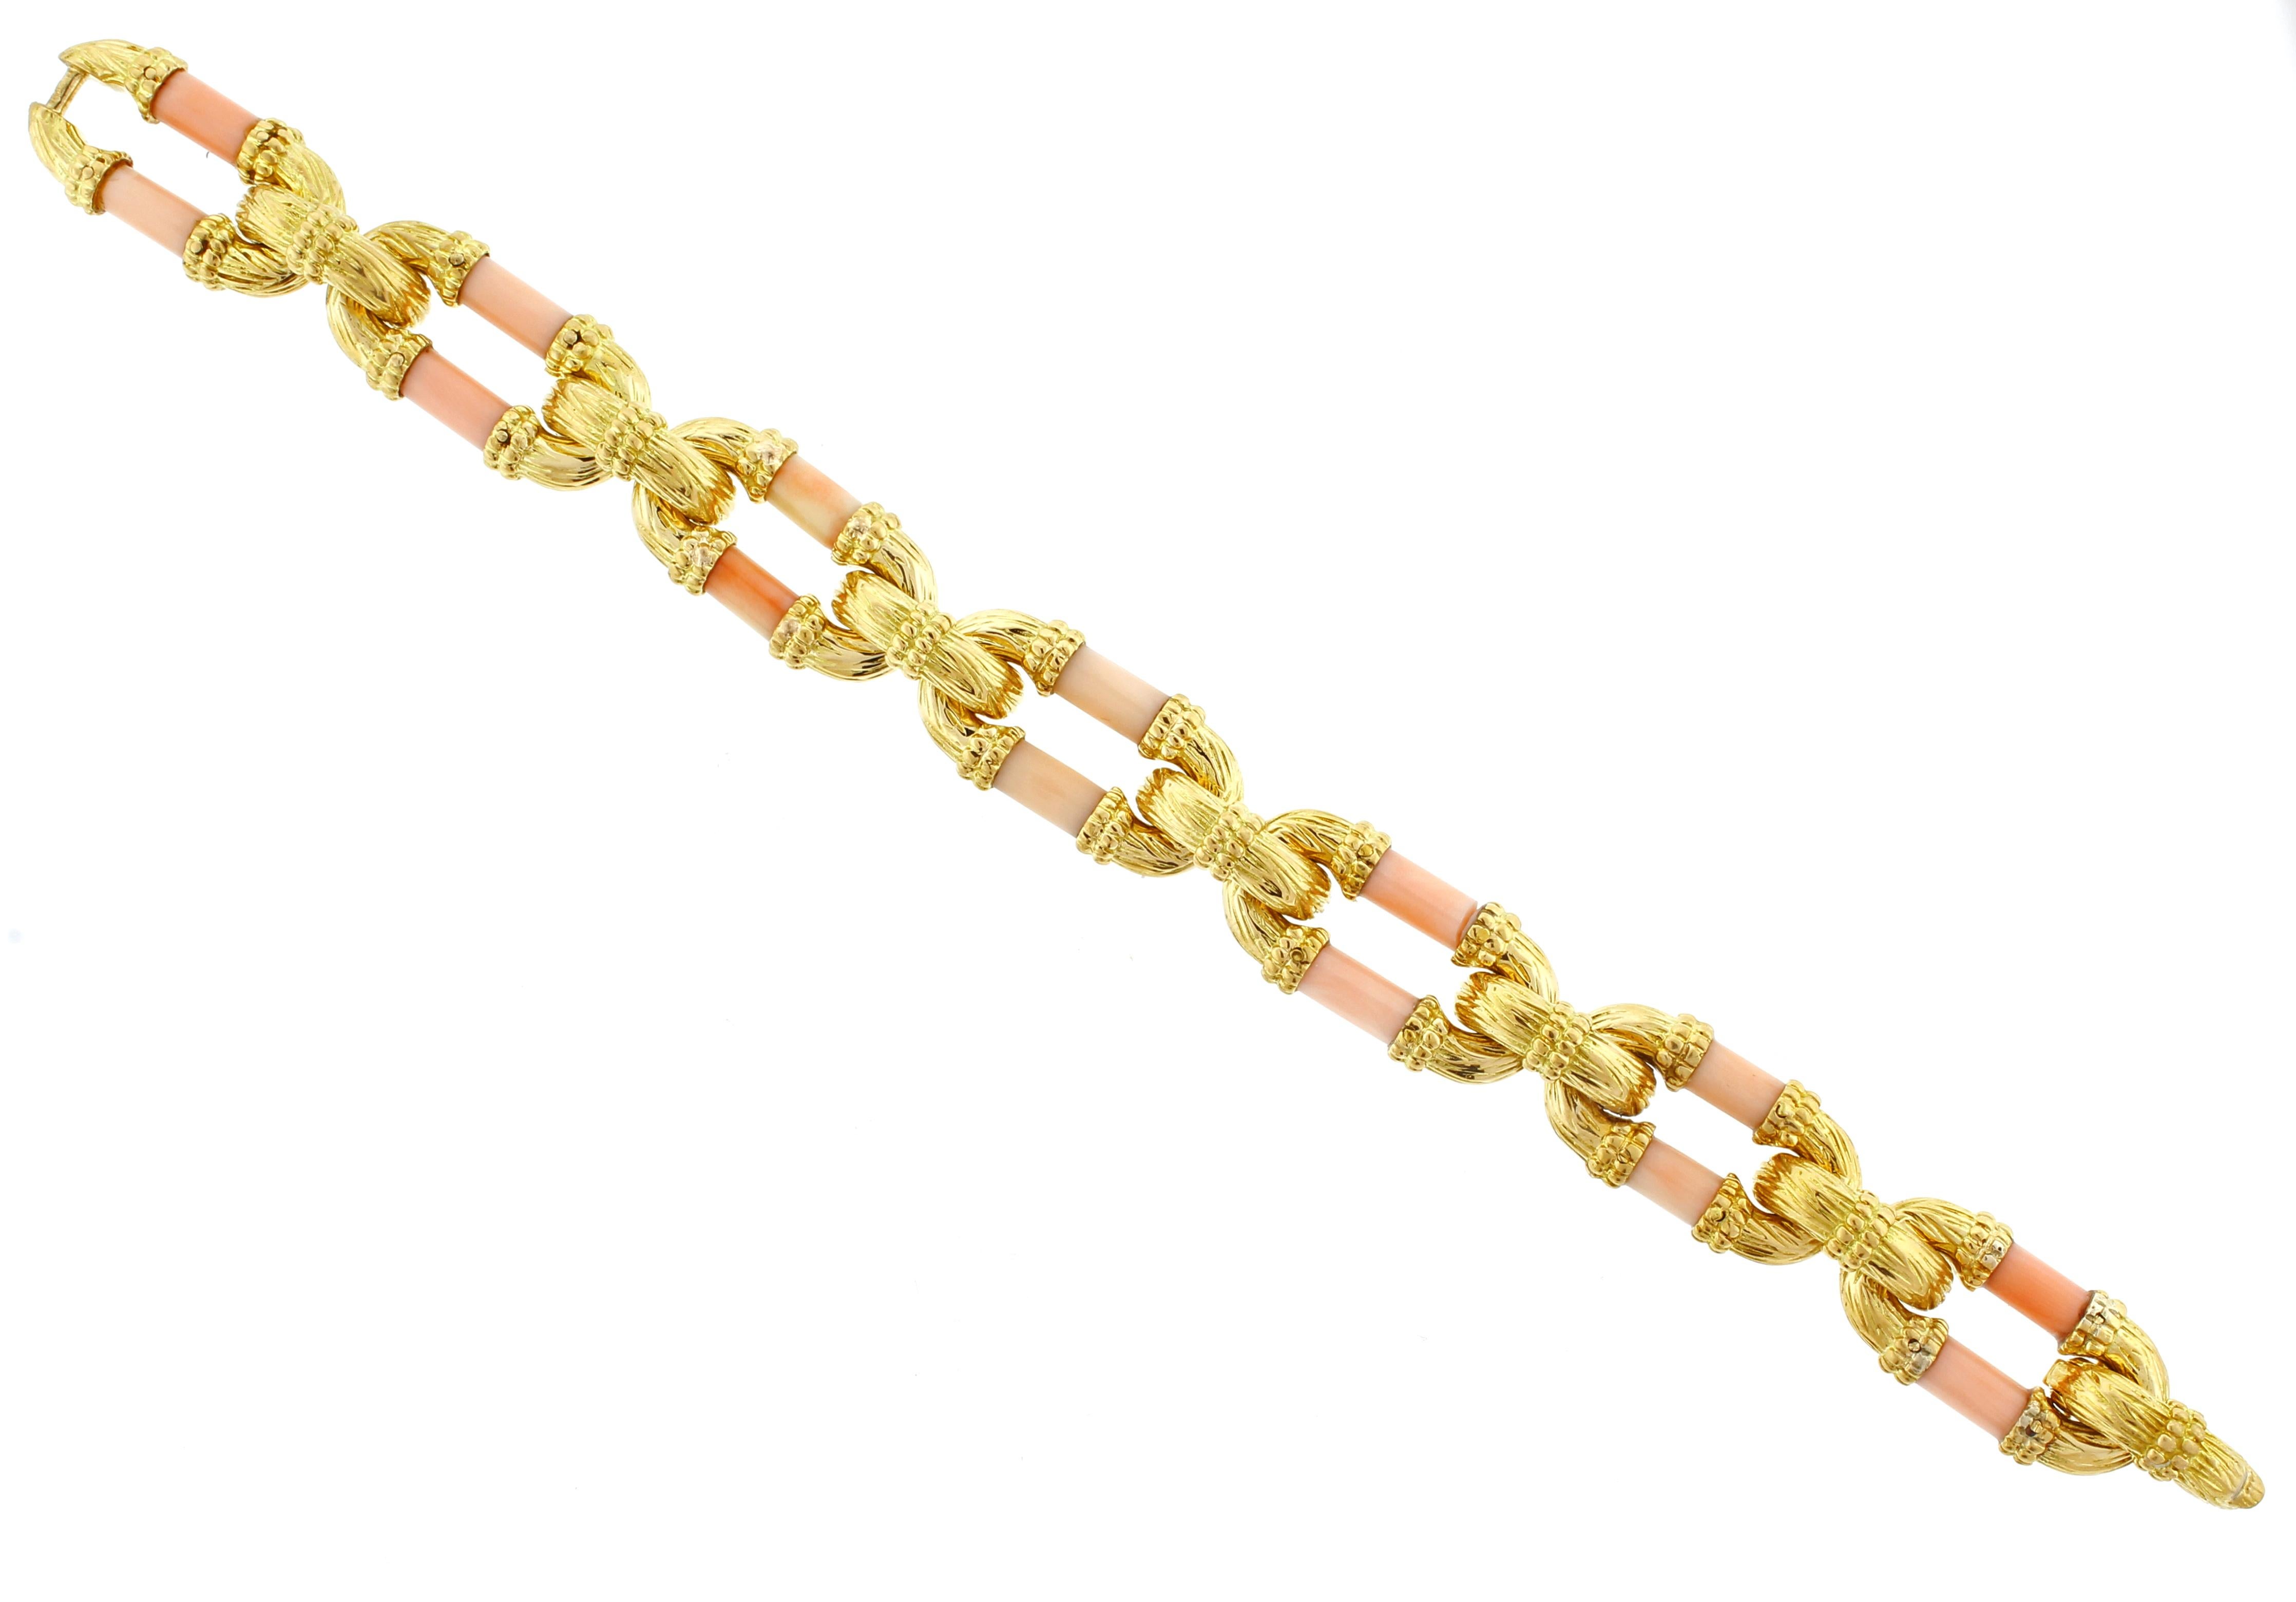 coral and gold bracelet